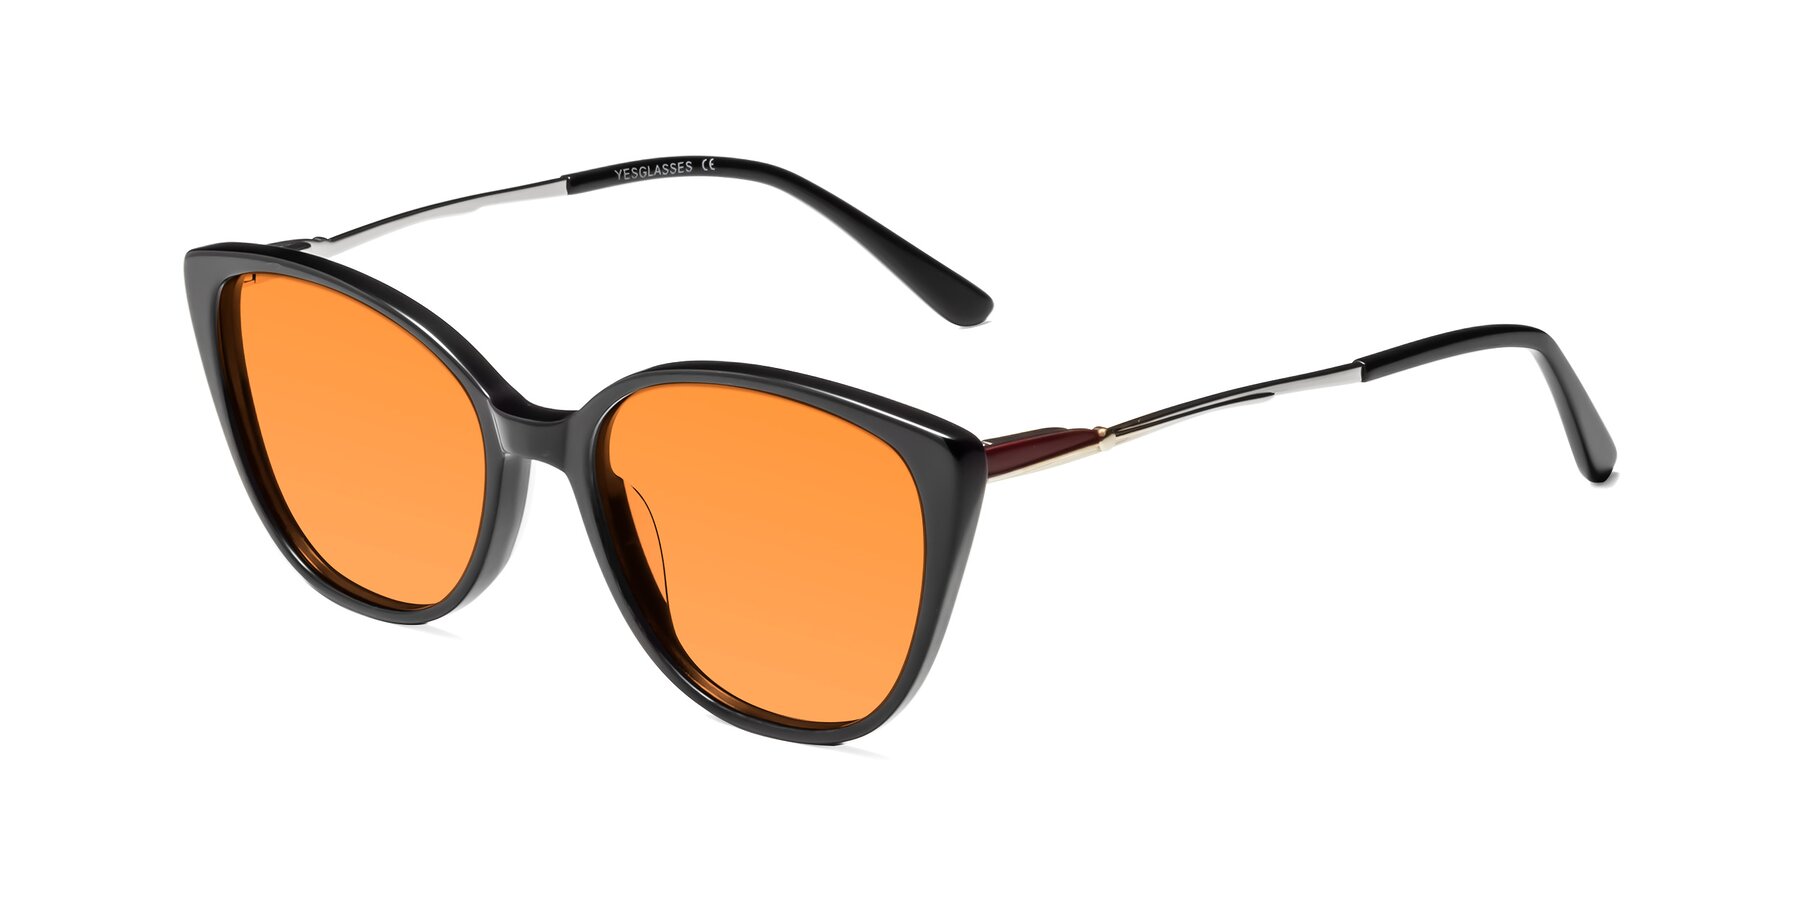 Angle of 17424 in Black with Orange Tinted Lenses